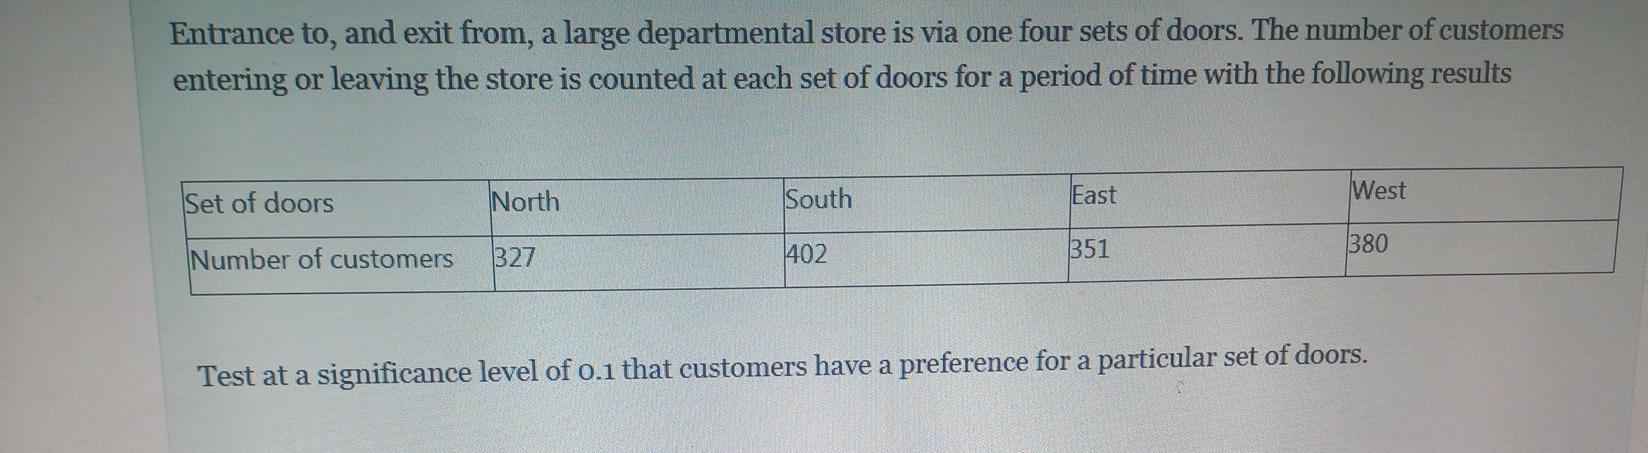 Entrance To And Exit From A Large Departmental Store Is Via One Four Sets Of Doors The Number Of Customers Entering O 1